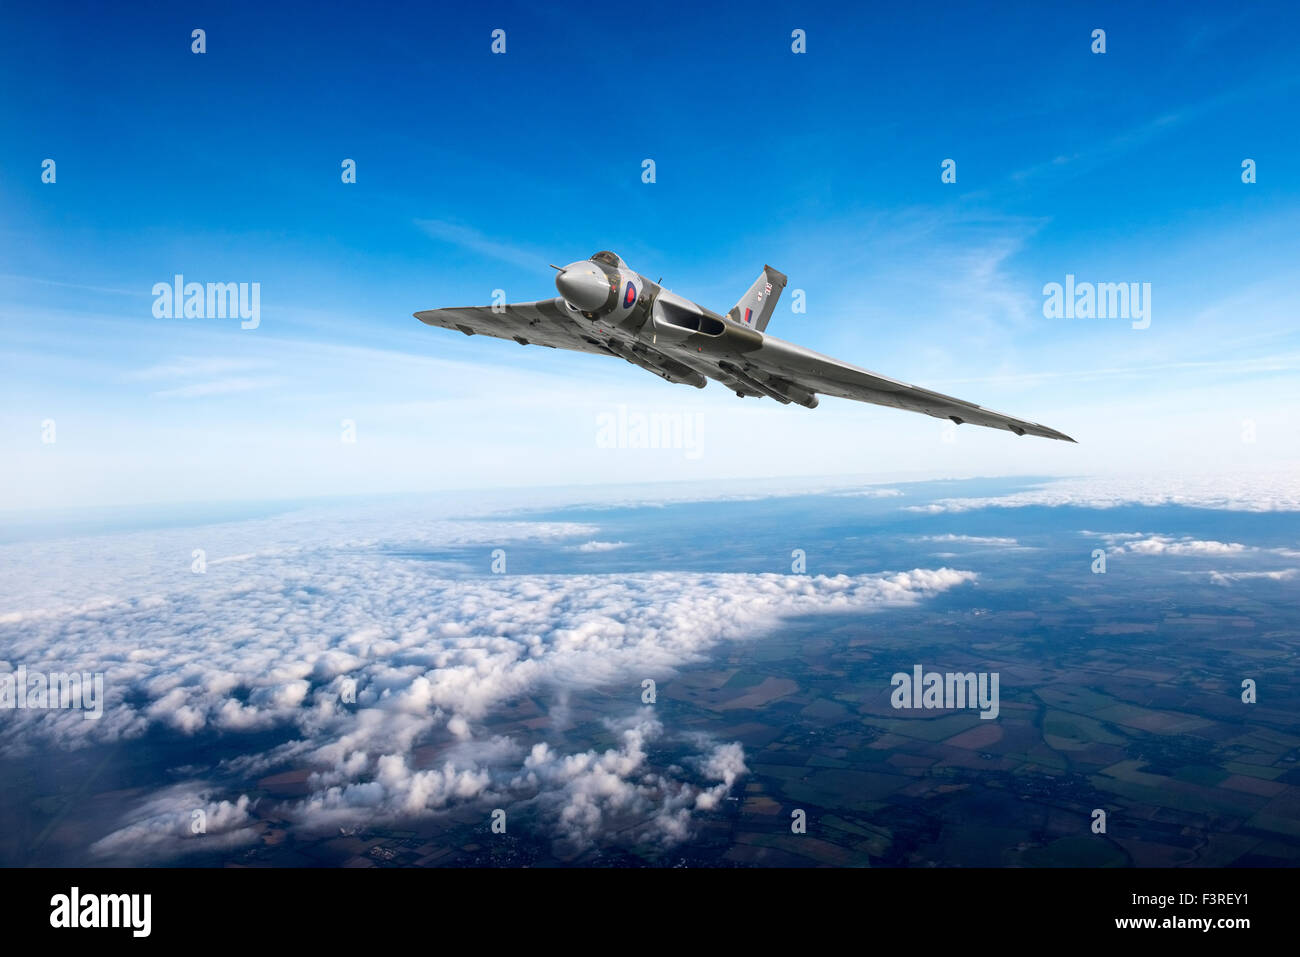 A depiction of an Avro Vulcan delta wing strategic bomber in the skies over the British countryside. Stock Photo